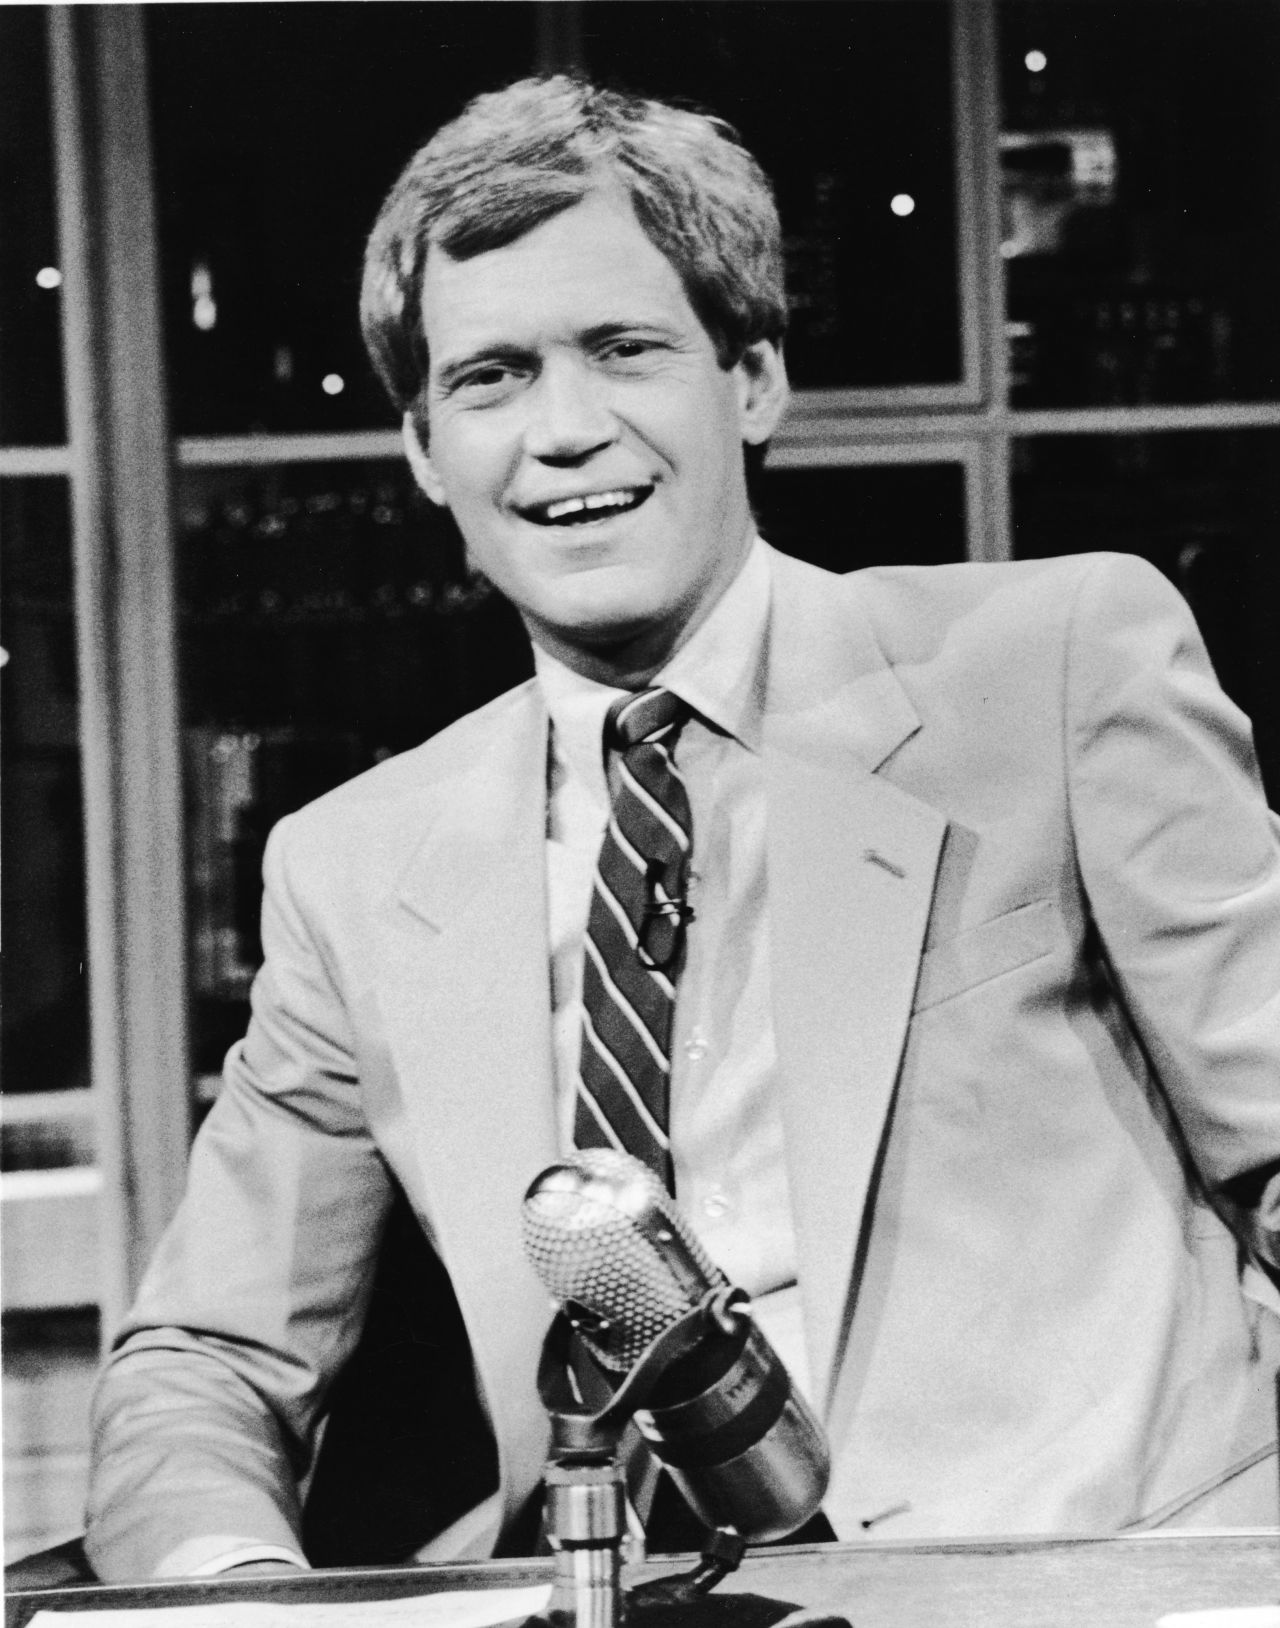 Back in 1986, David Letterman made his gripes with NBC parent company General Electric a shctick on his late night talk show, "The Late Show With David Letterman." <a href="http://www.youtube.com/watch?v=8V6IU9tfXDo" target="_blank" target="_blank">His visit to the headquarters with a fruit basket </a>is now a classic.